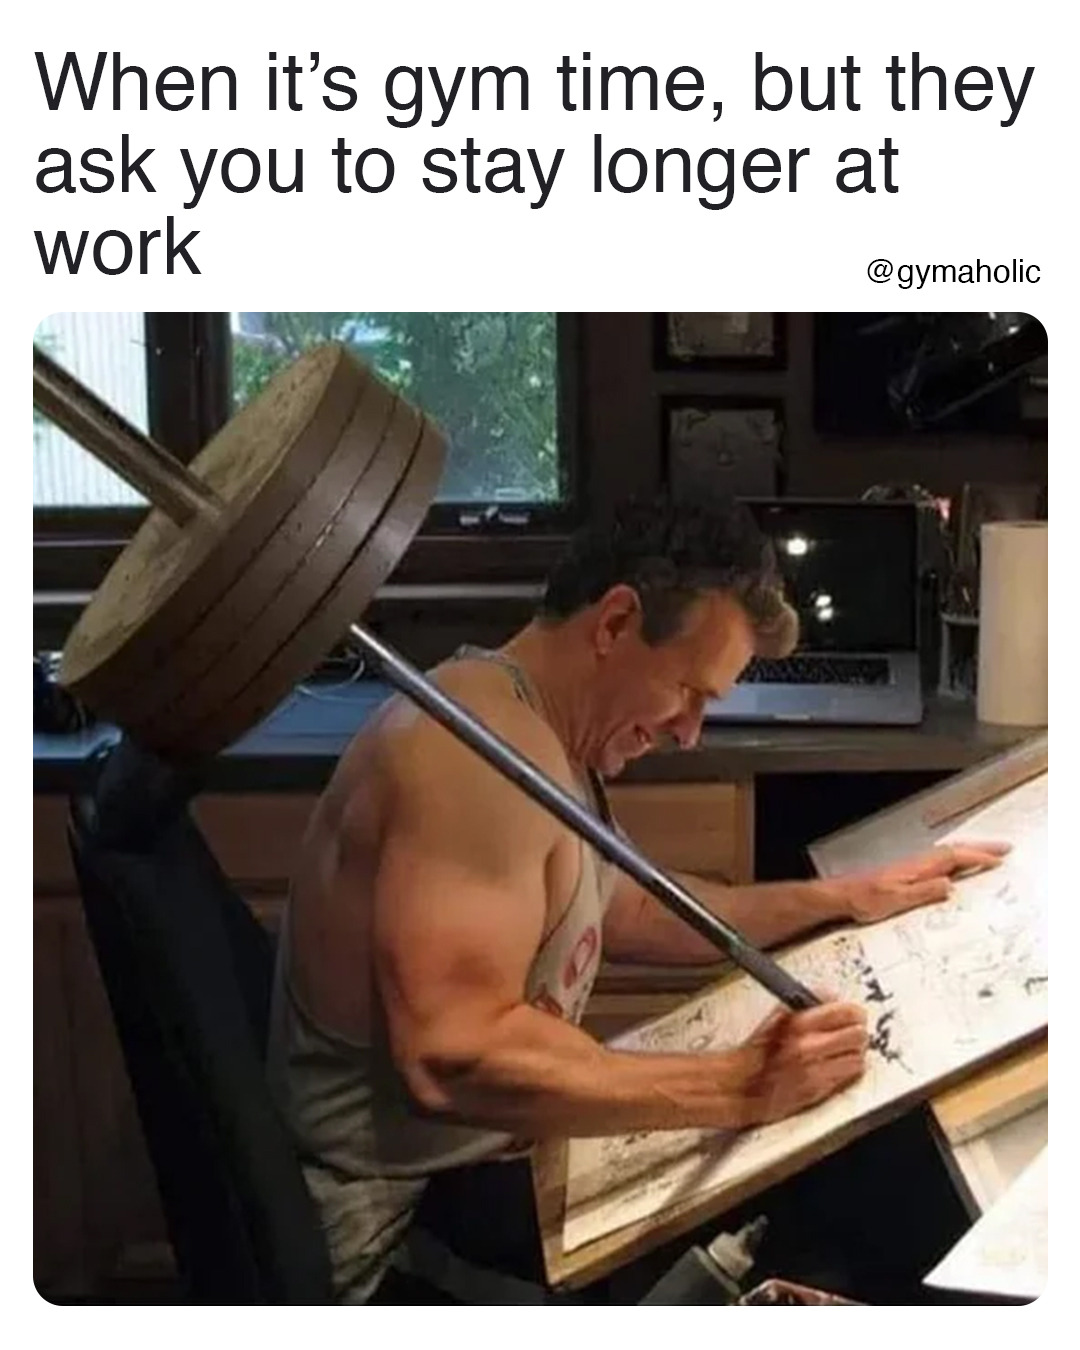 When it’s gym time, but they ask you to stay longer at work